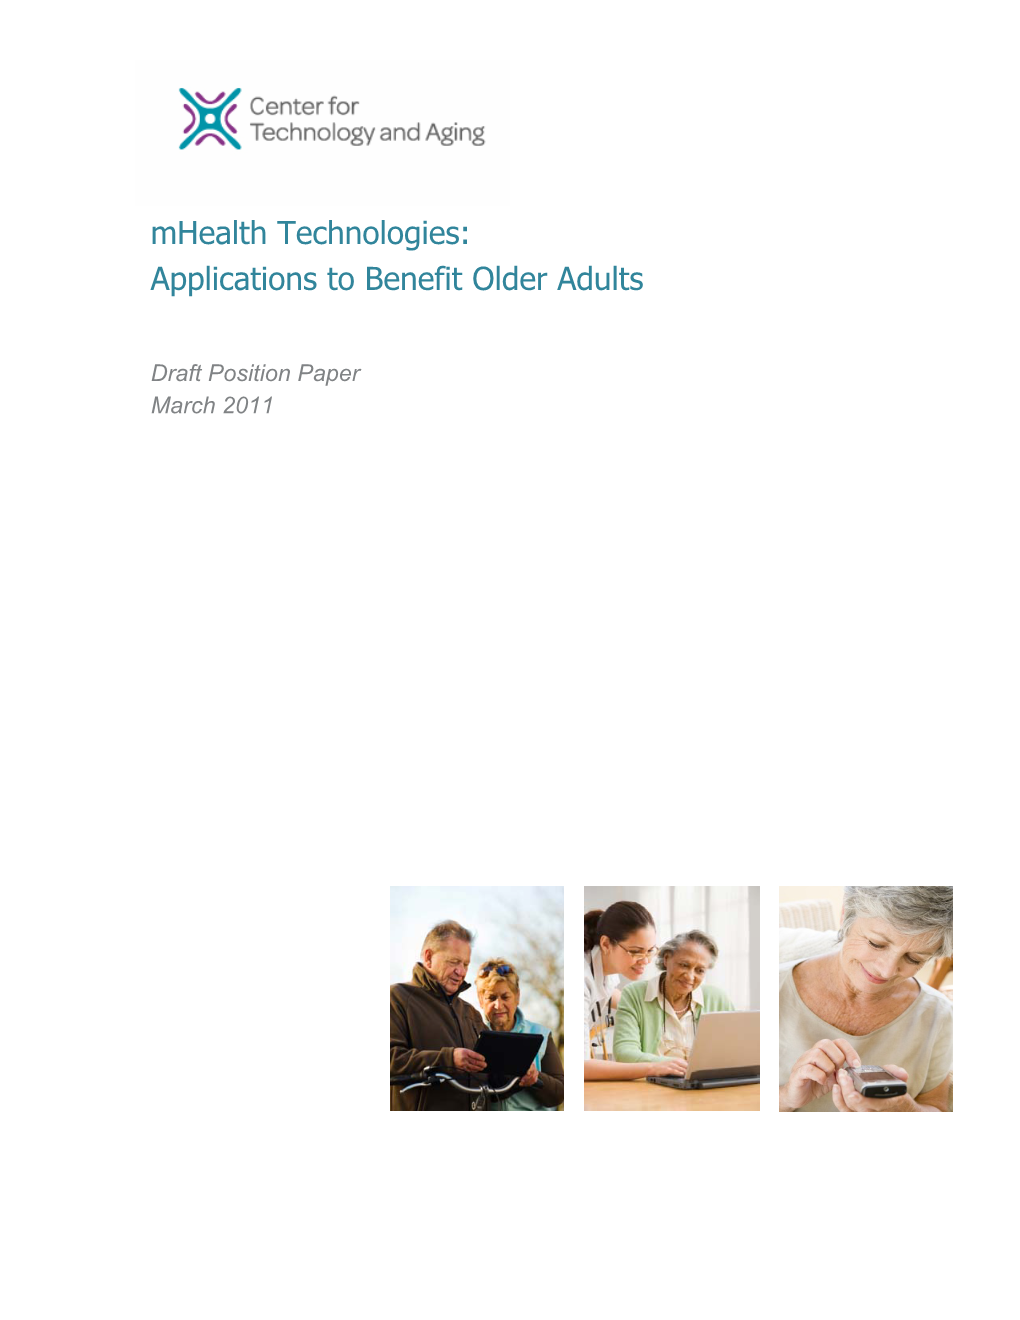 Mhealth Technologies: Applications to Benefit Older Adults